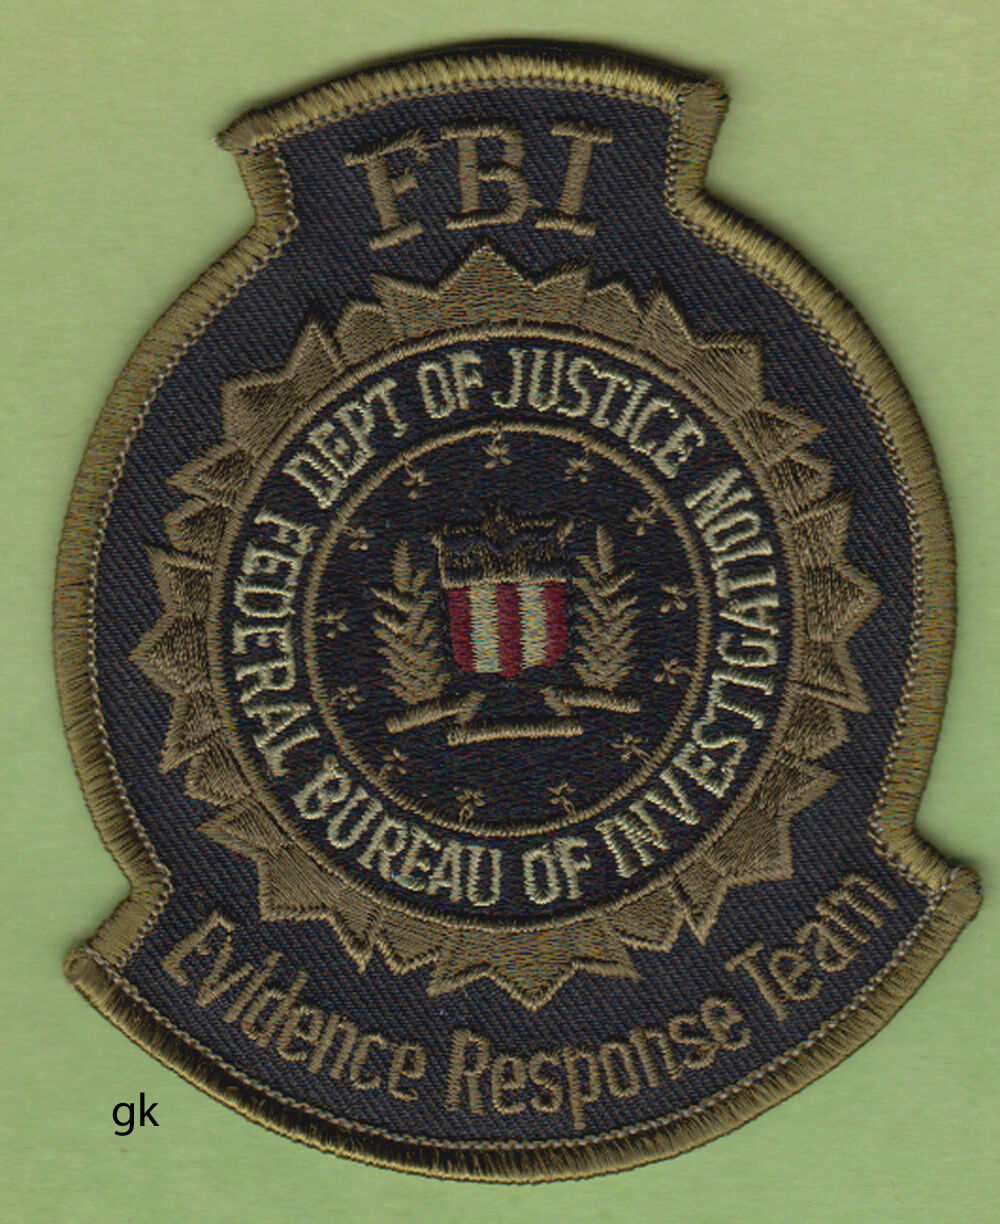 FBI EVIDENCE RESPONSE DEPARTMENT OF JUSTICE POLICE SHOULDER PATCH  (SUBDUED)